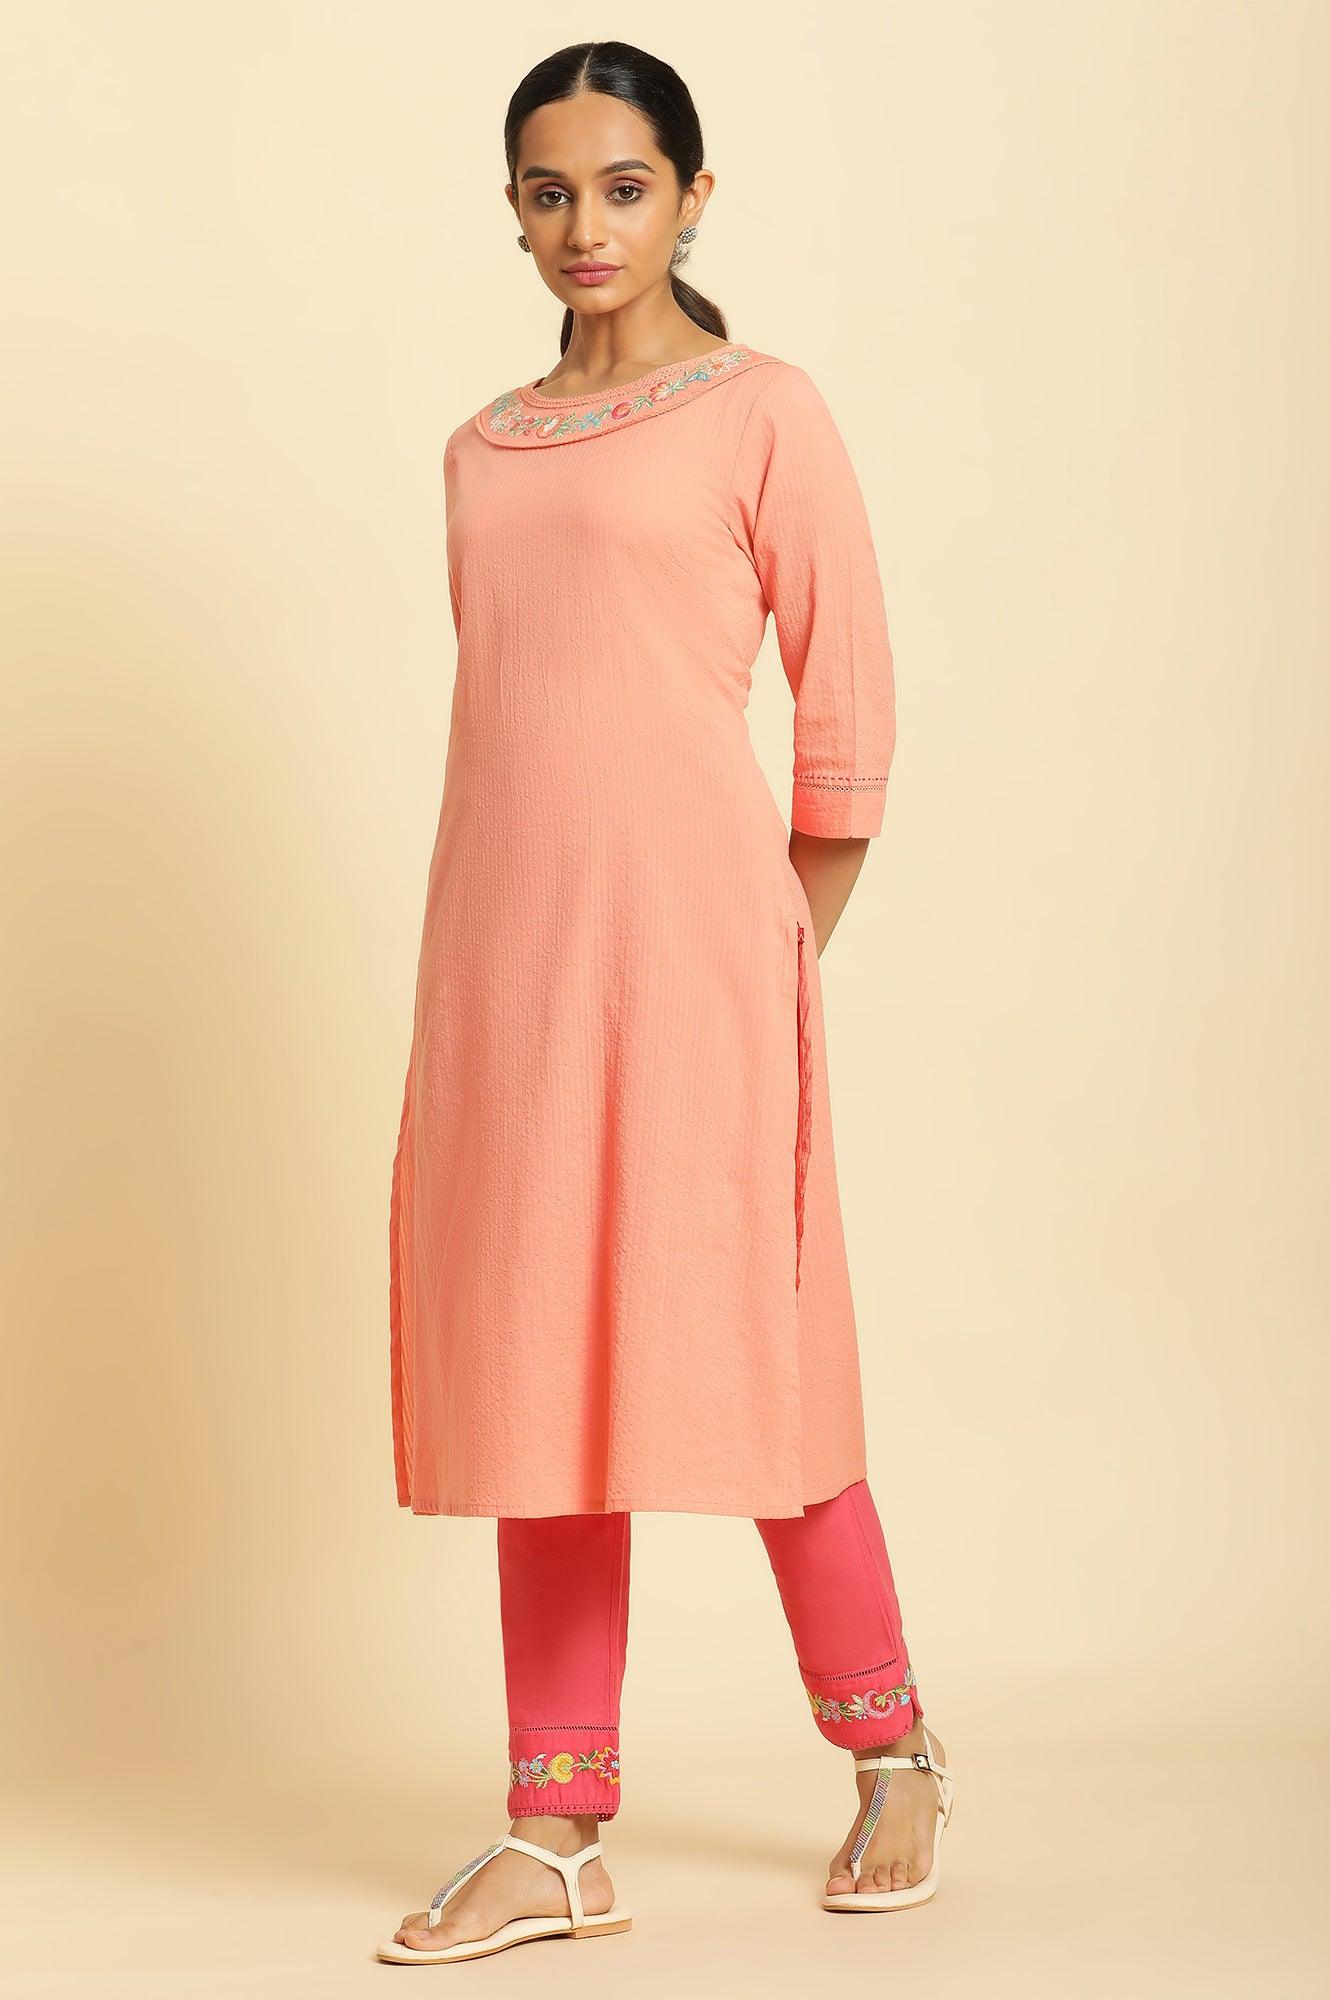 Coral Seer Sucker Kurta With Multi-Coloured Floral Embroidery - wforwoman